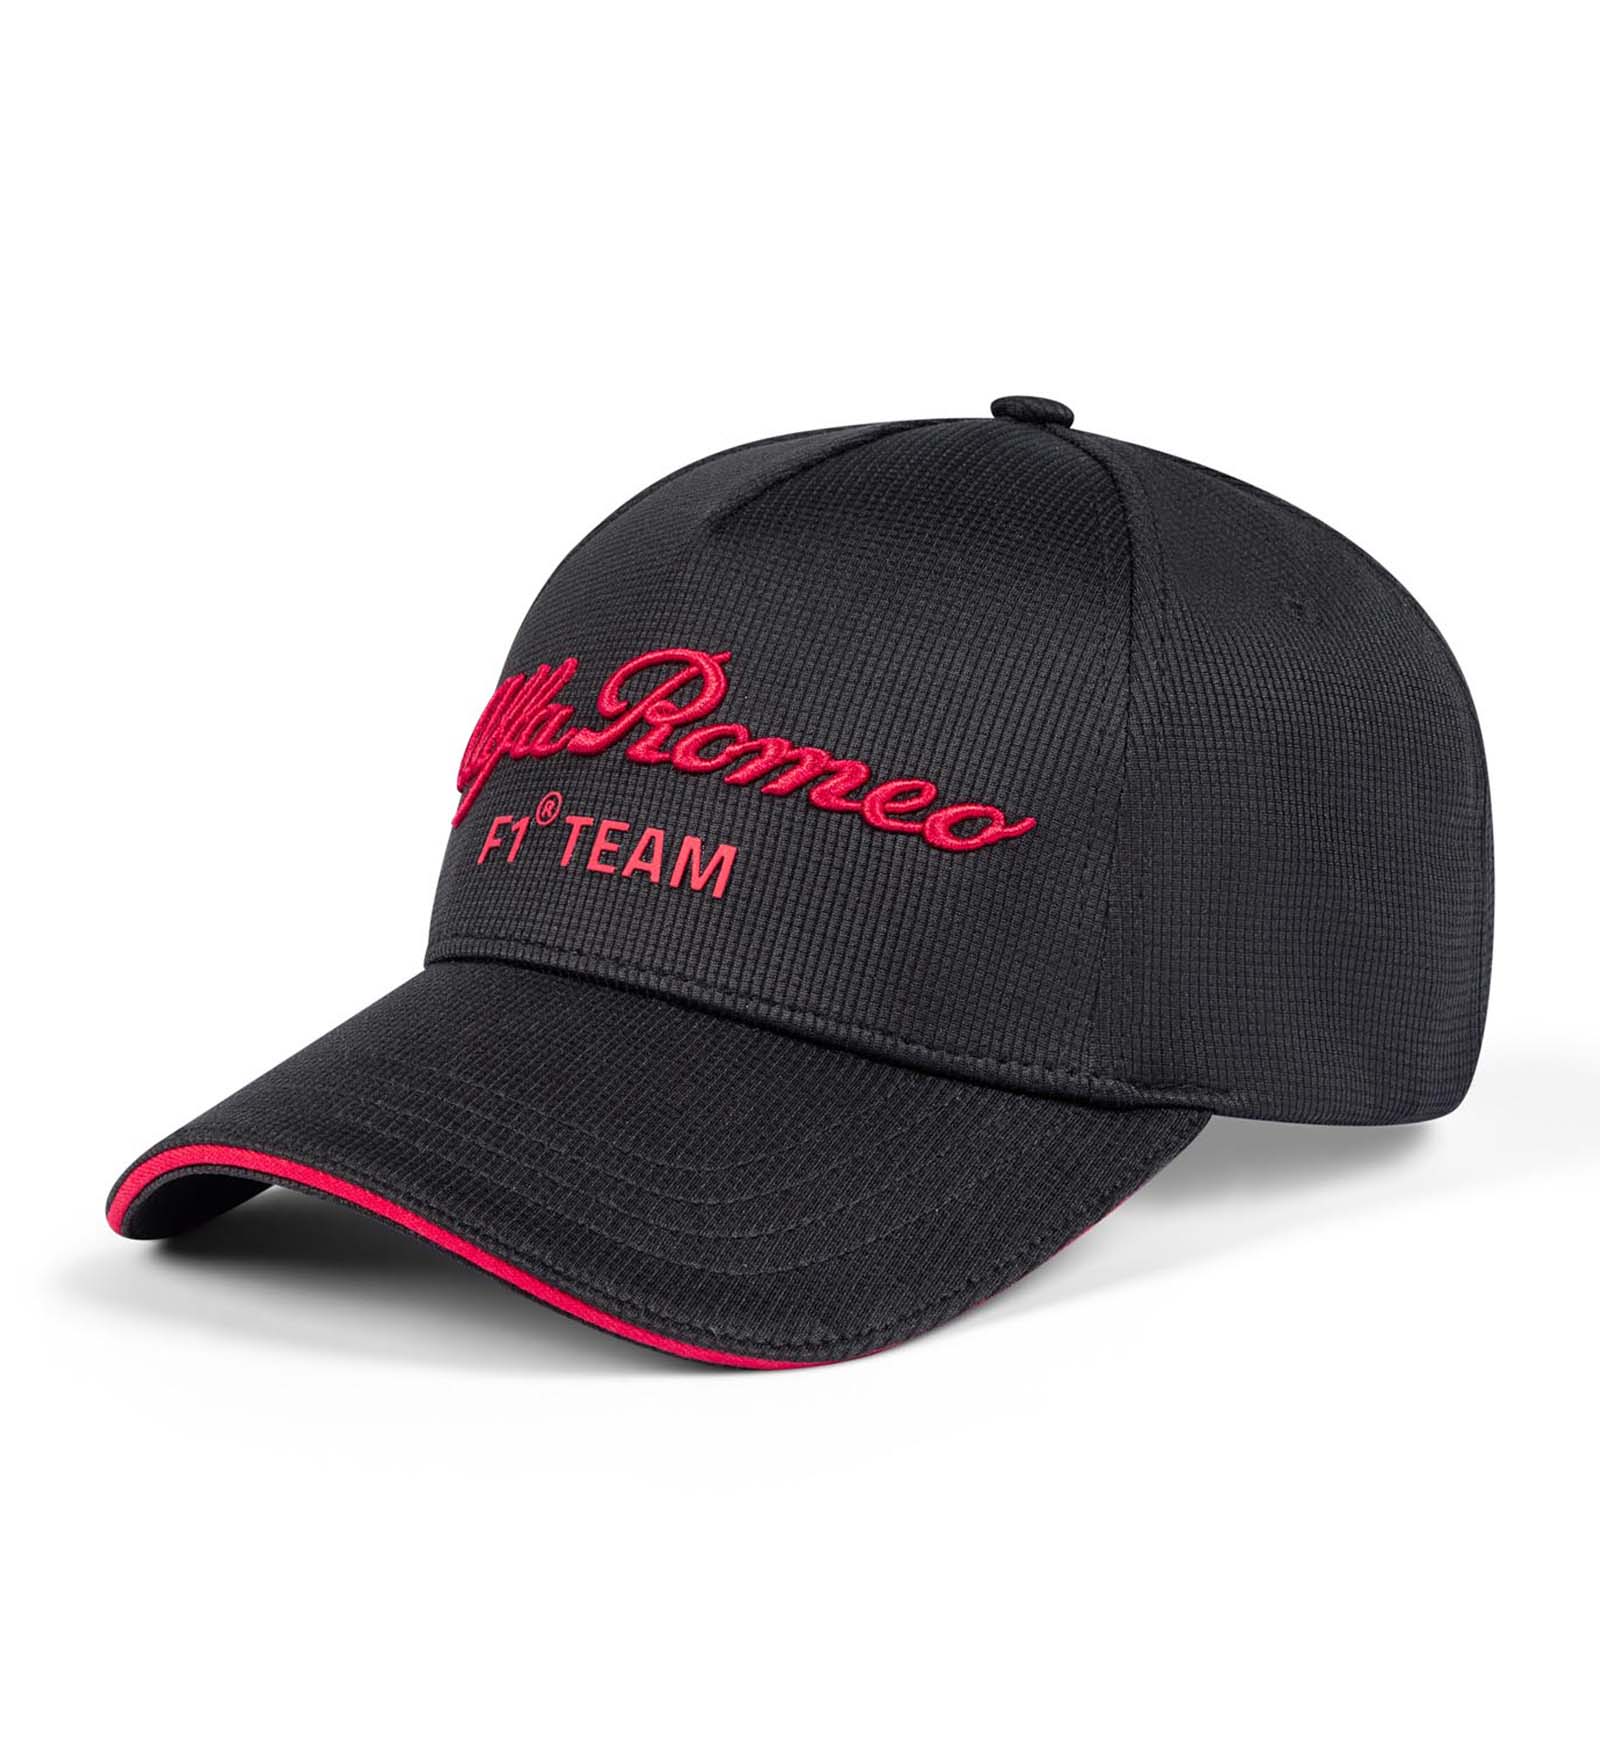 Team Cap Limited Edition